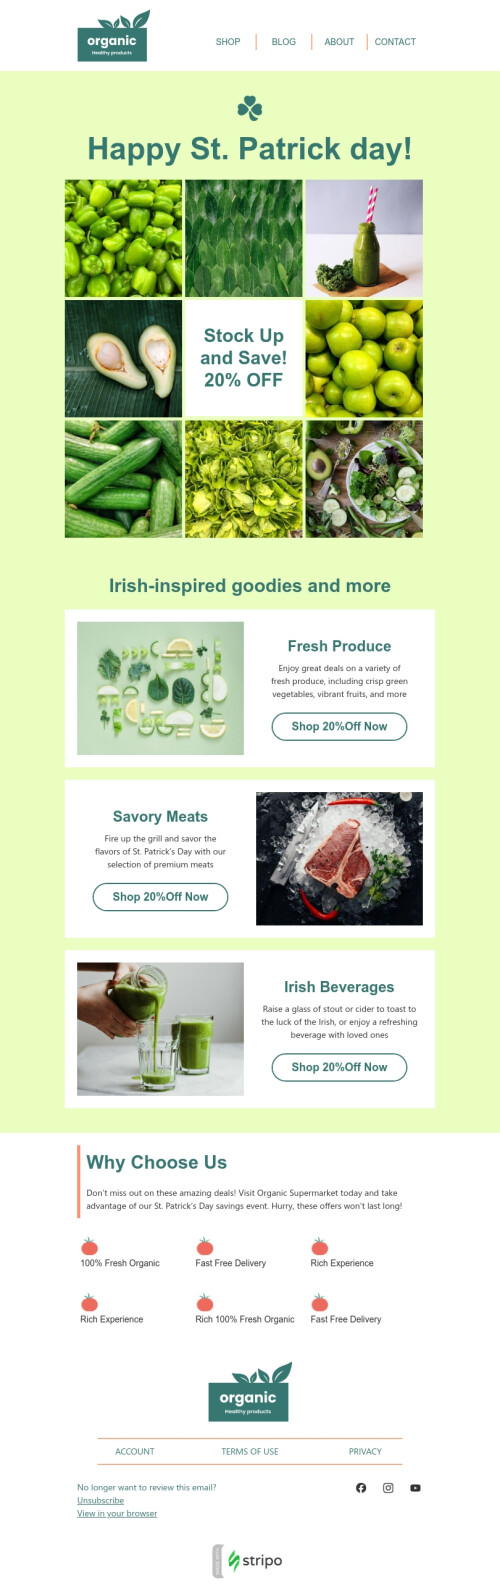 St. Patrick's Day email template "Stock up and save" for food industry mobile view